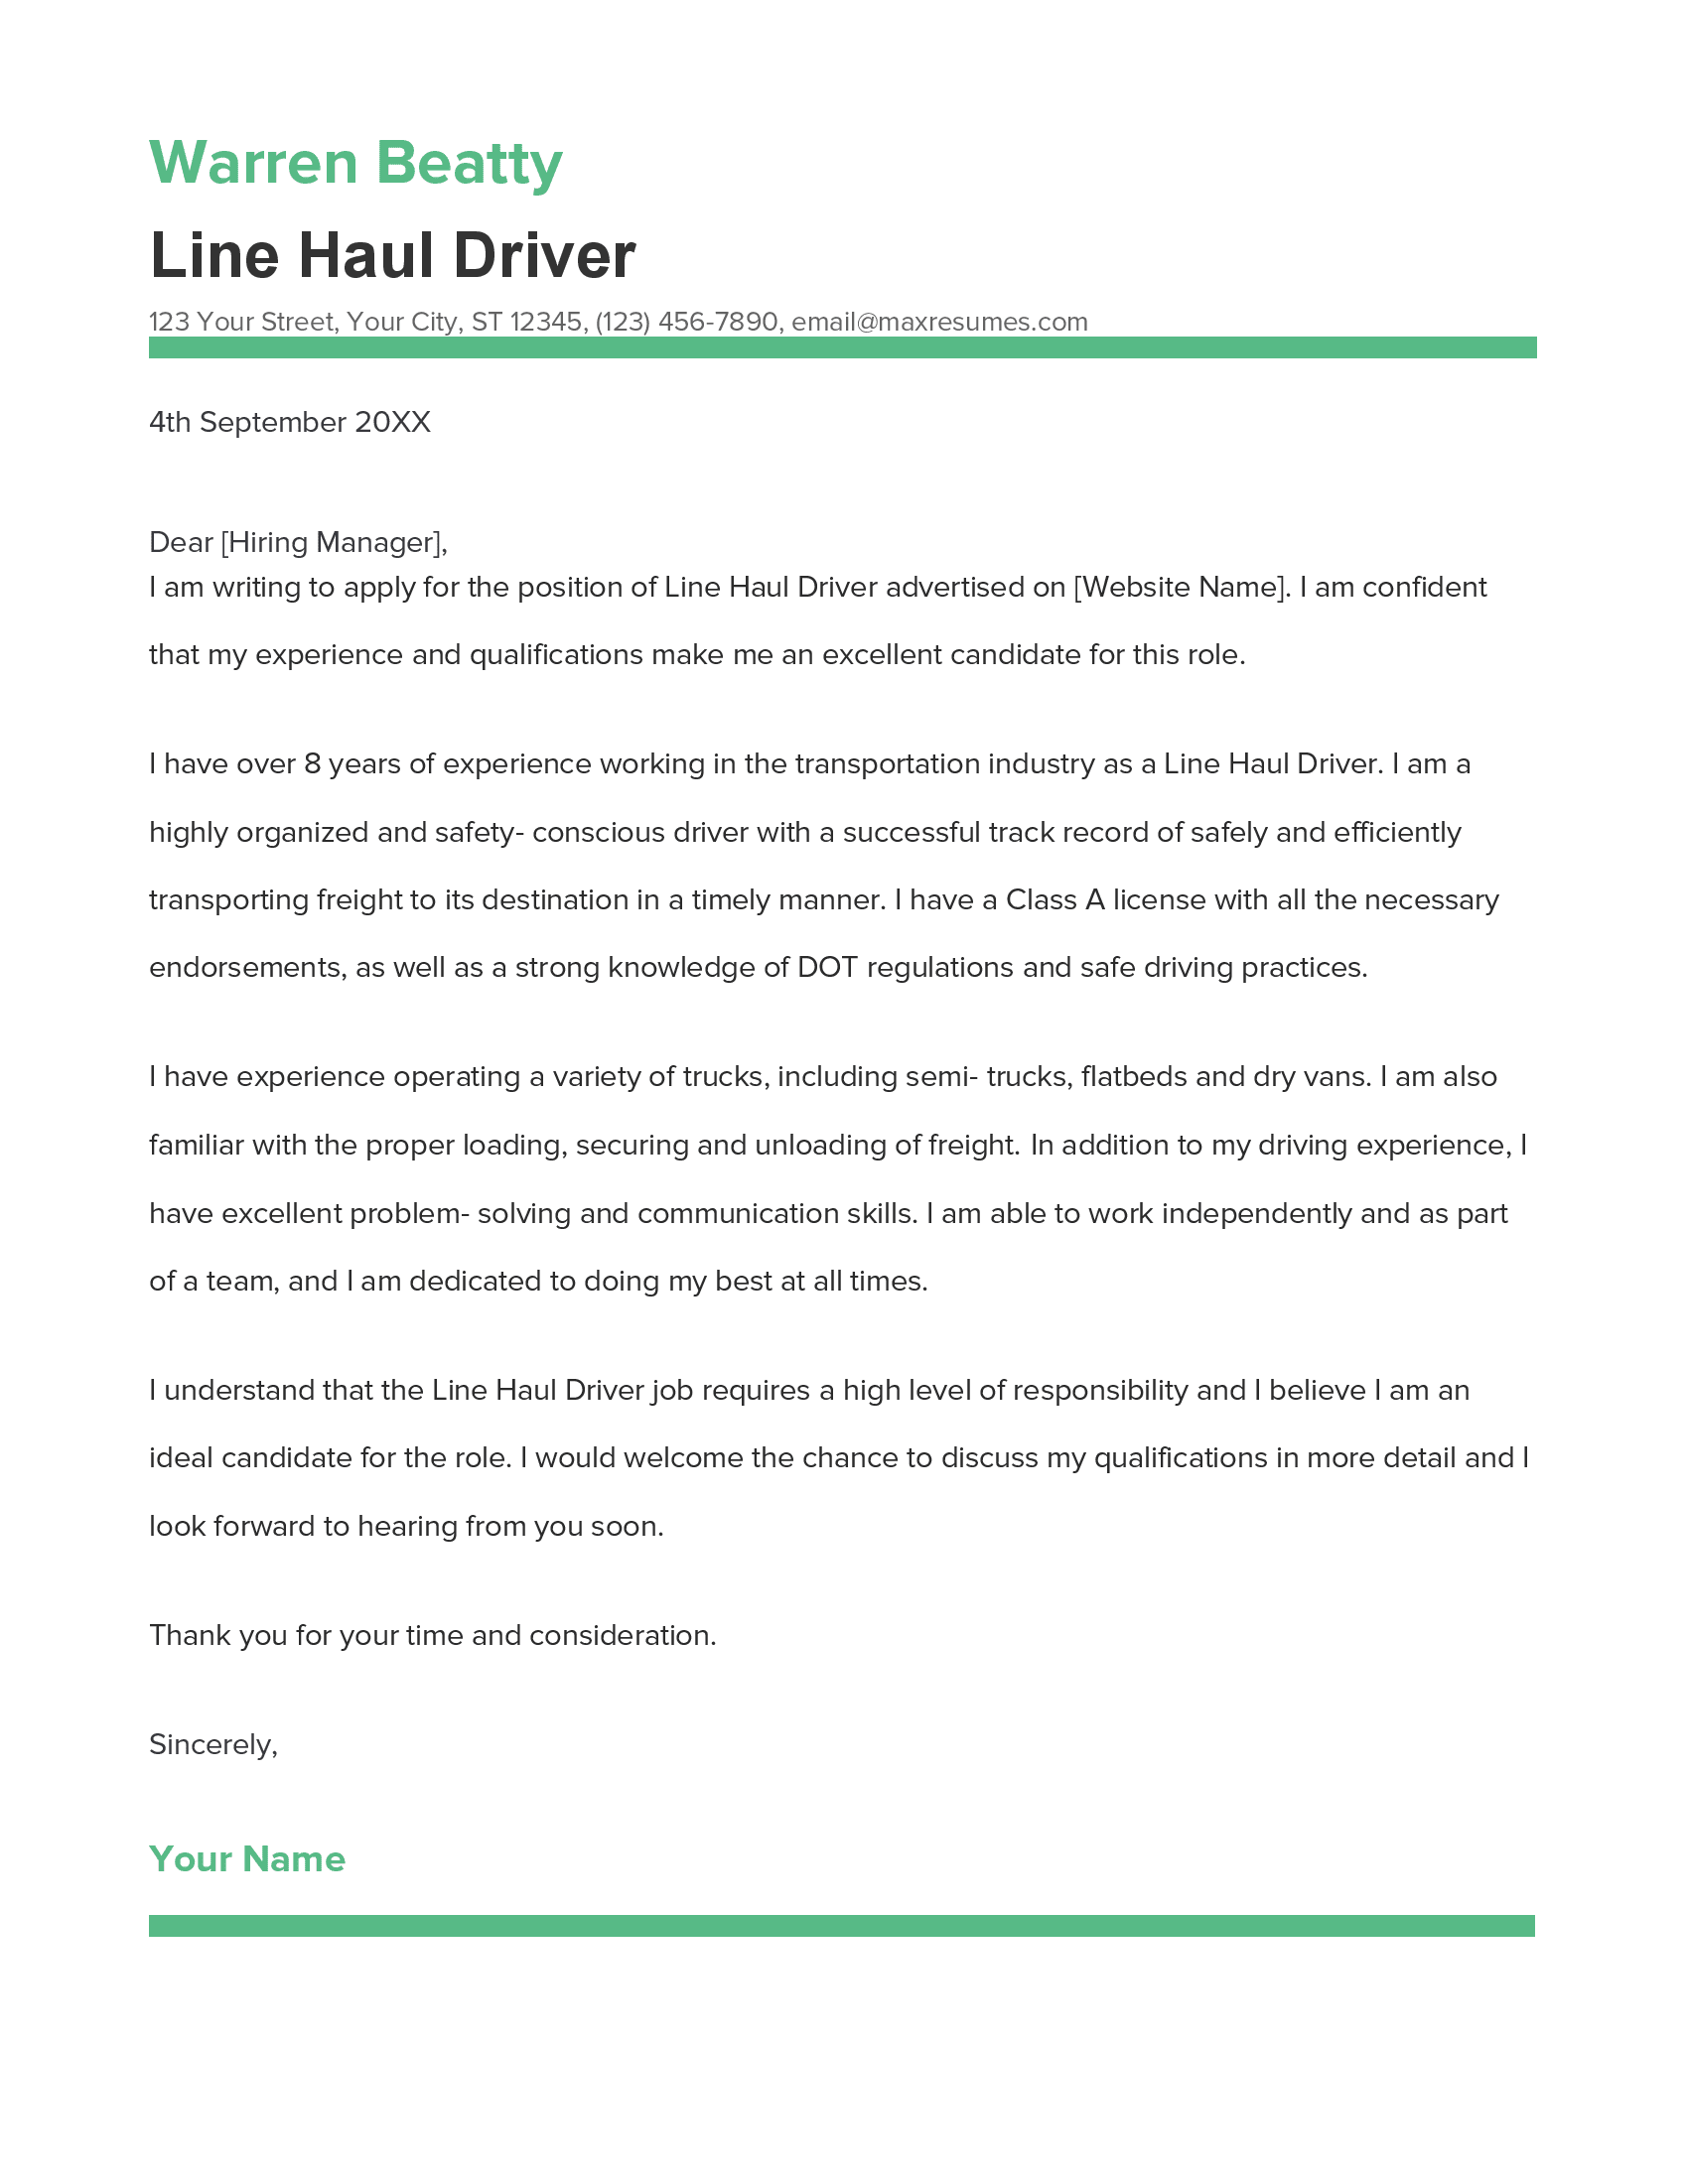 Line Haul Driver Cover Letter Example